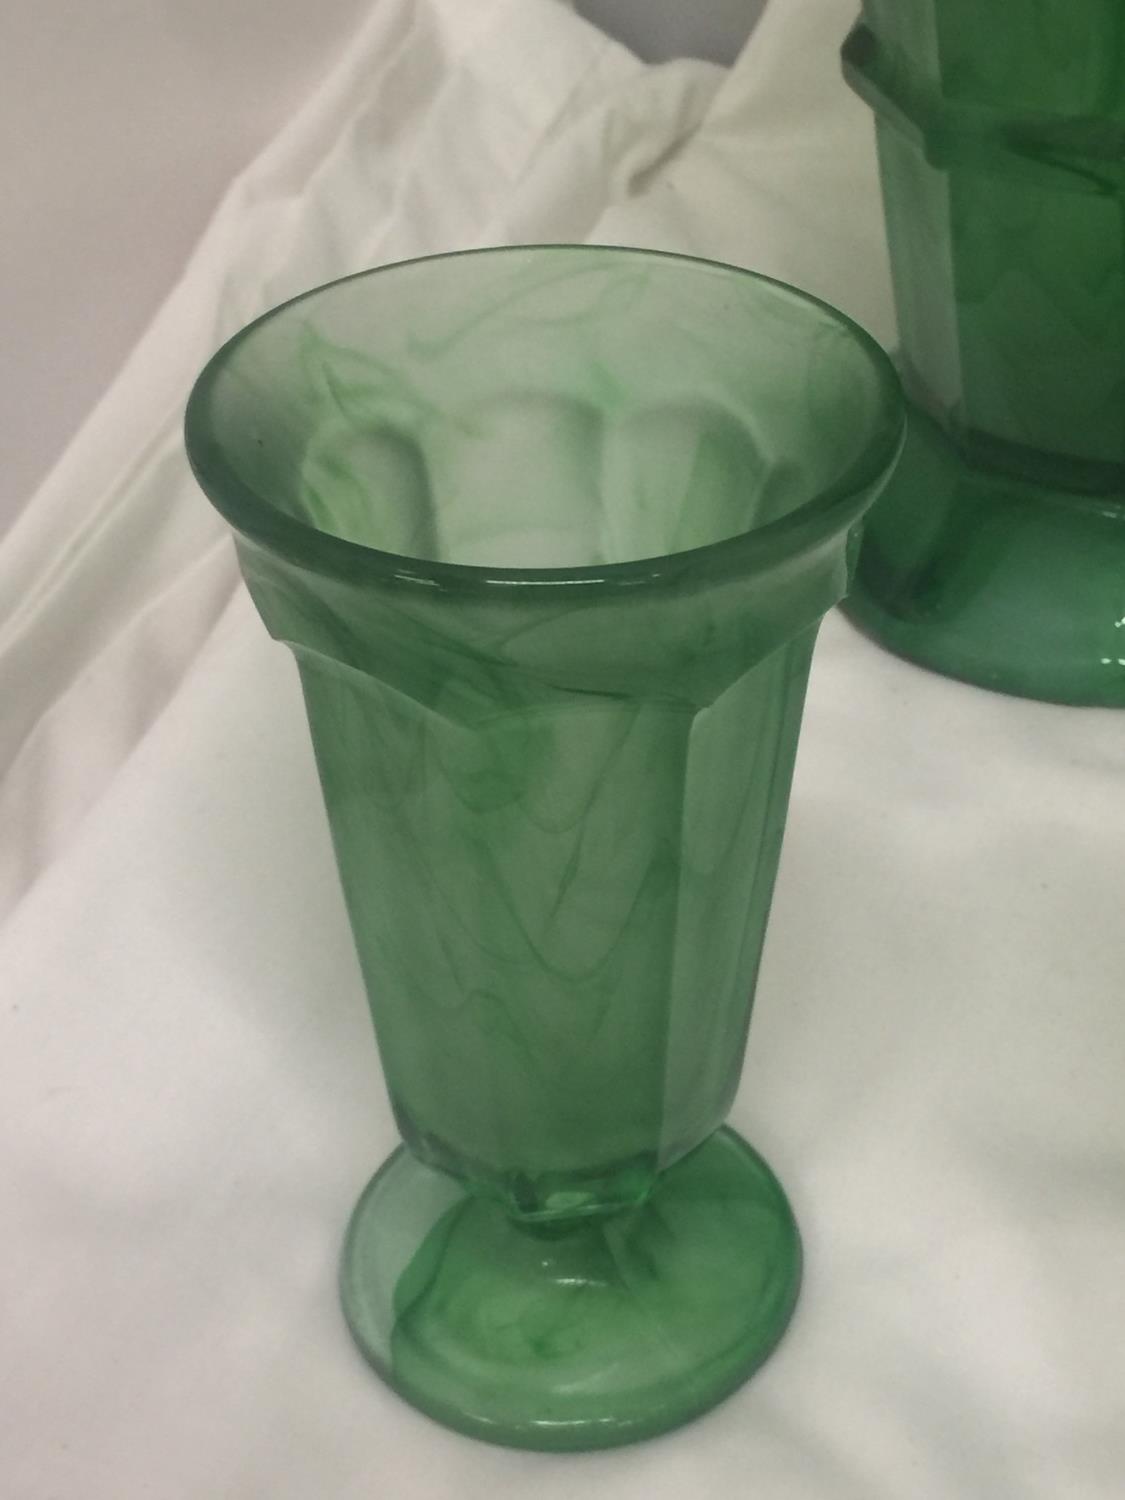 FIVE PIECES OF EMERALD GREEN CLOUD GLASS TO INCLUDE PLANTERS AND VASES - Image 5 of 6